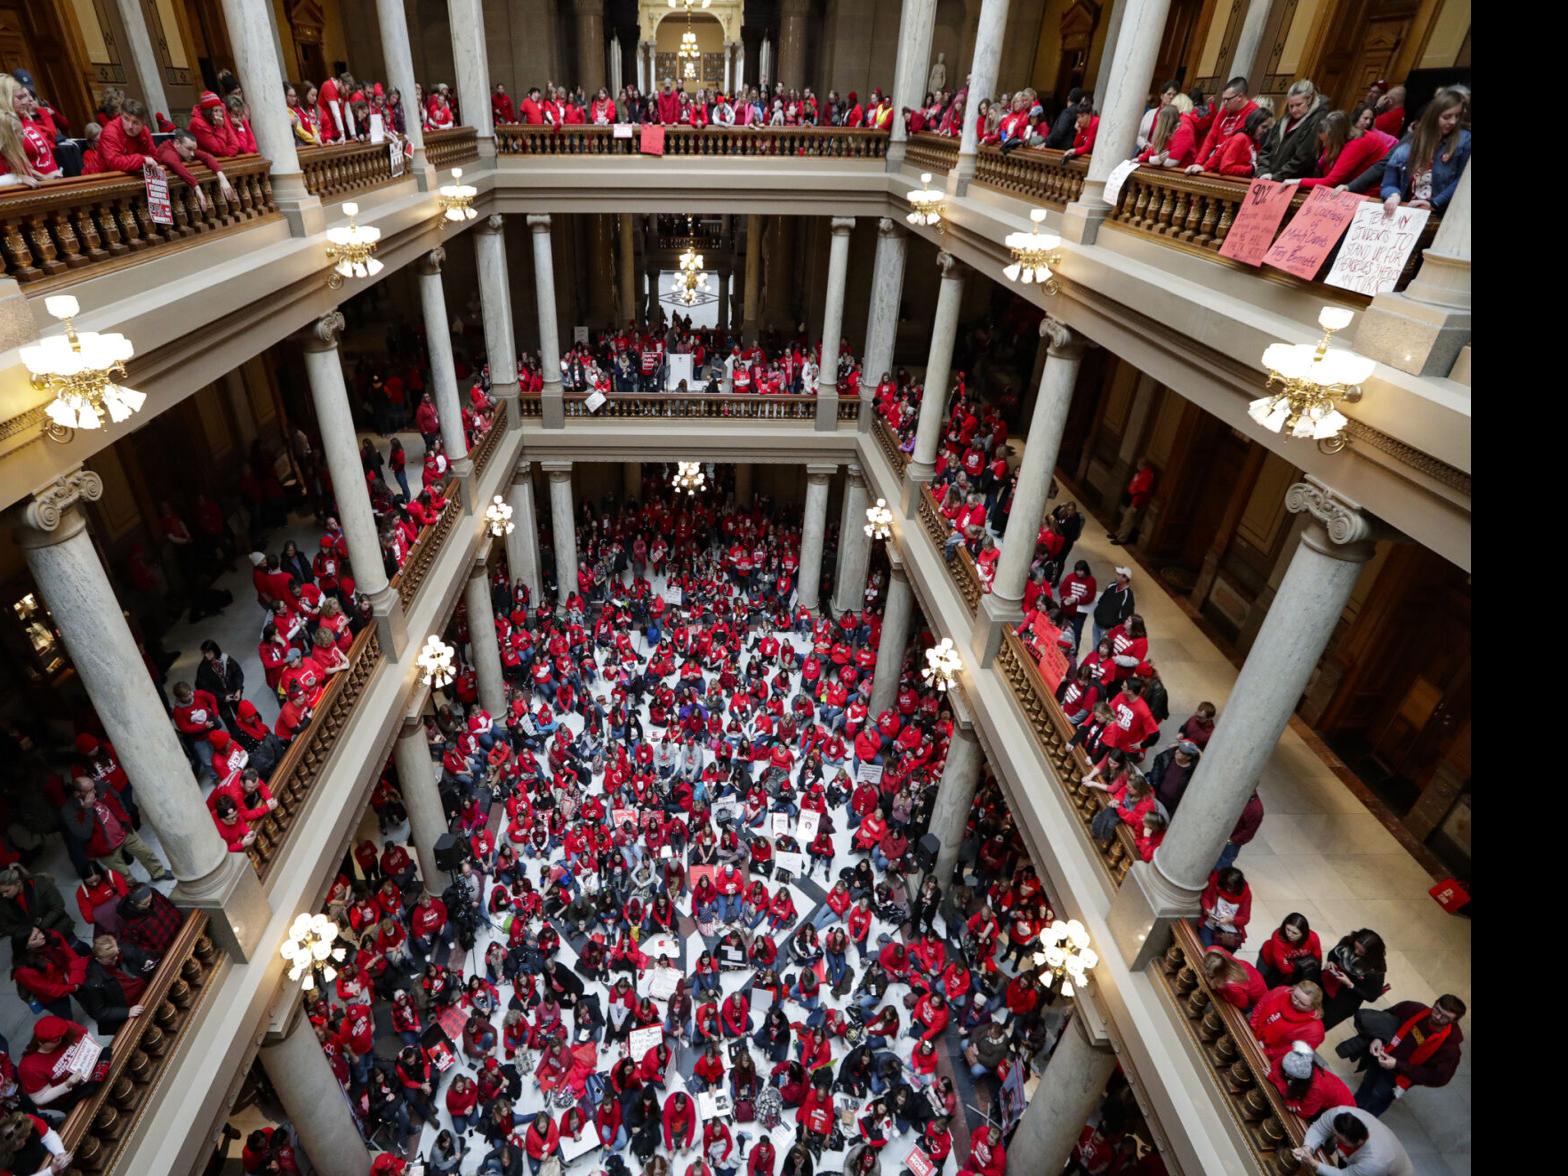 Indiana teachers unions rally for more funding, a stop to harmful  legislation - Indiana Capital Chronicle